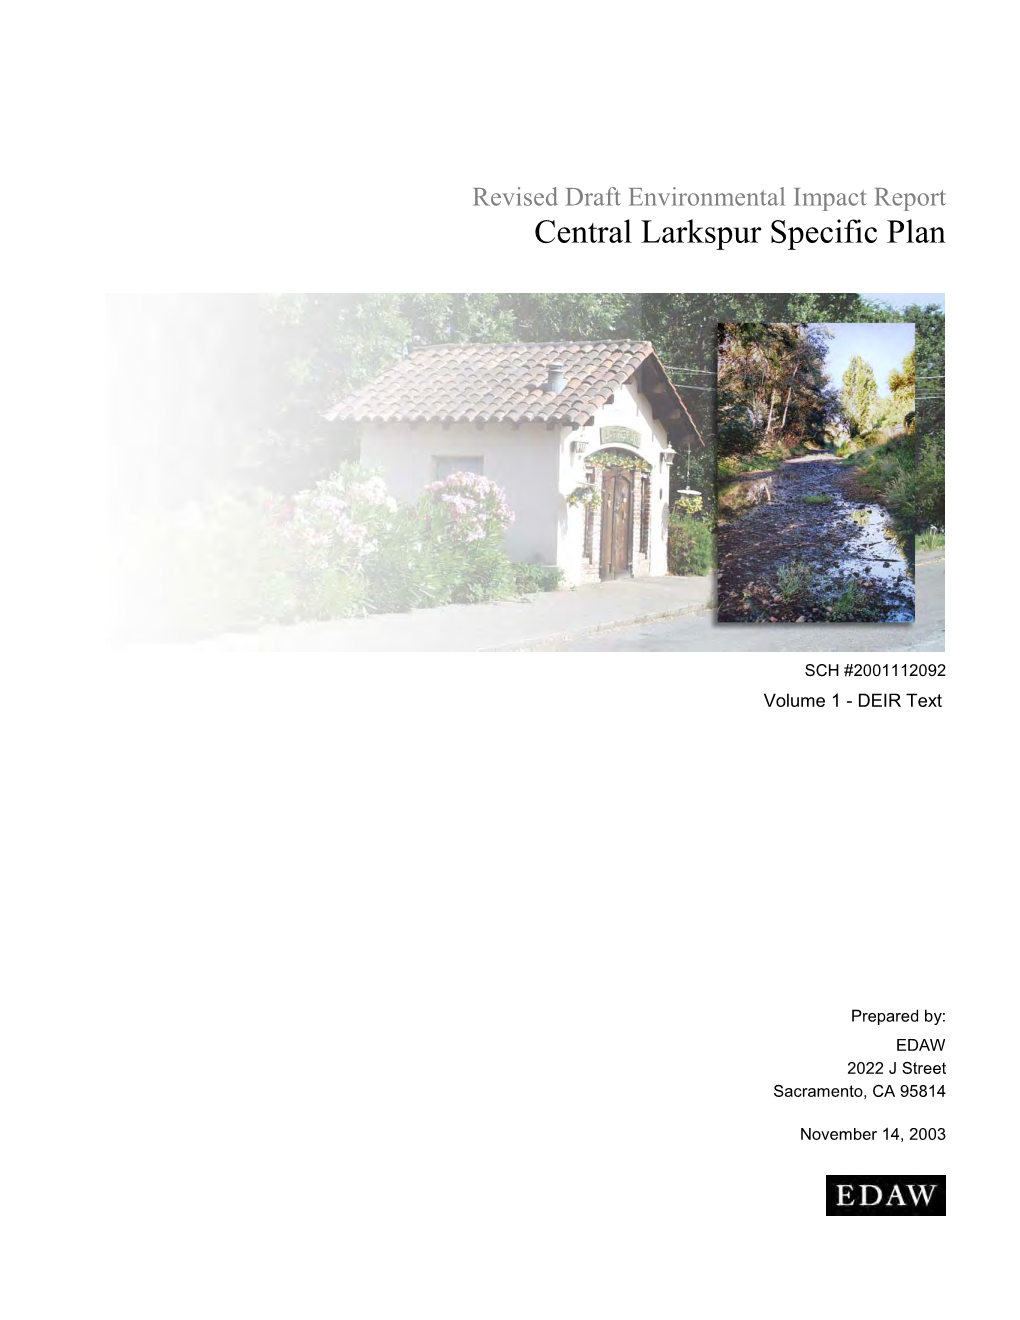 Revised Draft Environmental Impact Report Central Larkspur Specific Plan